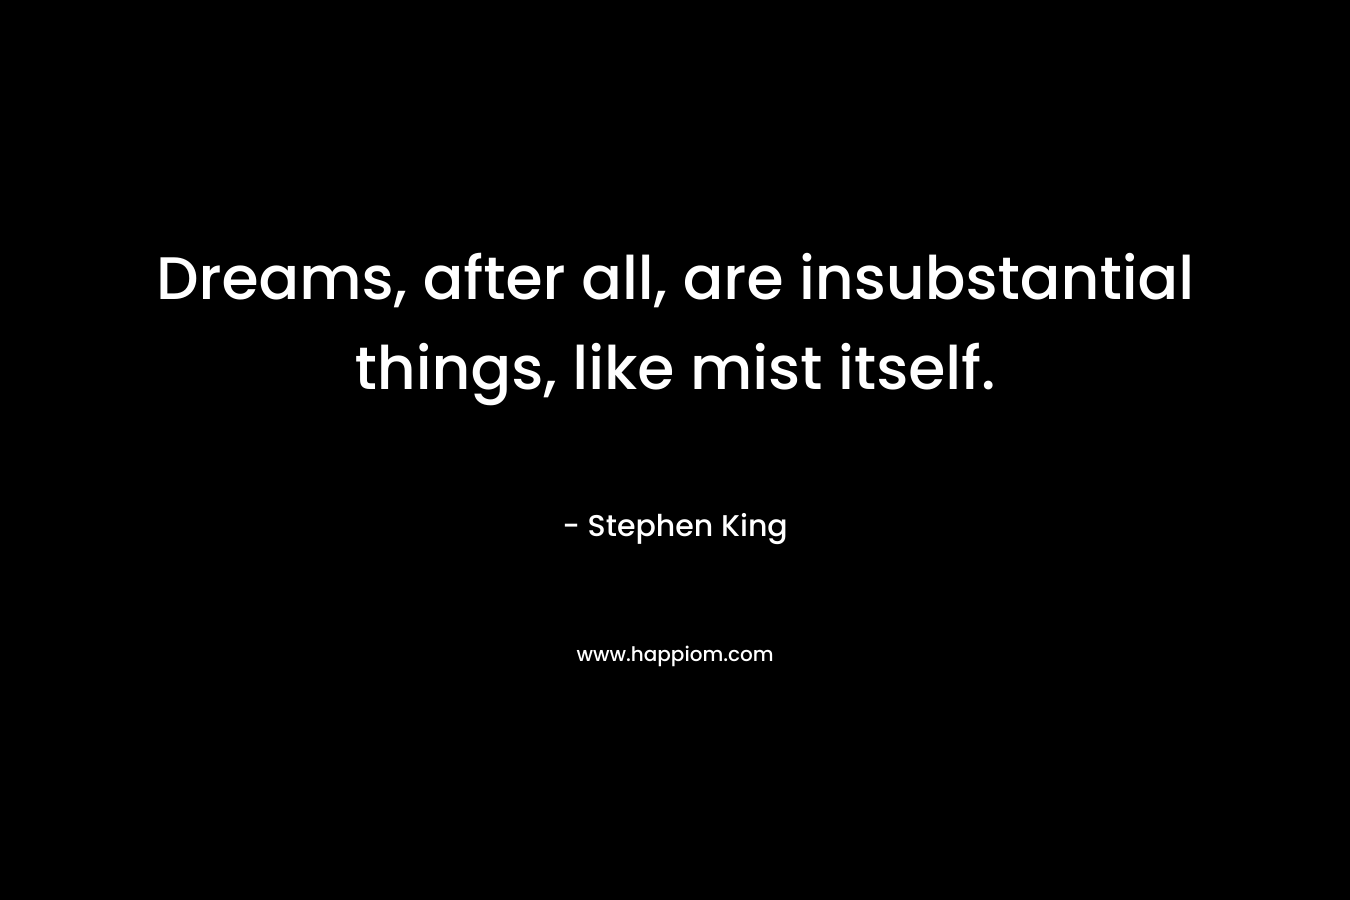 Dreams, after all, are insubstantial things, like mist itself.